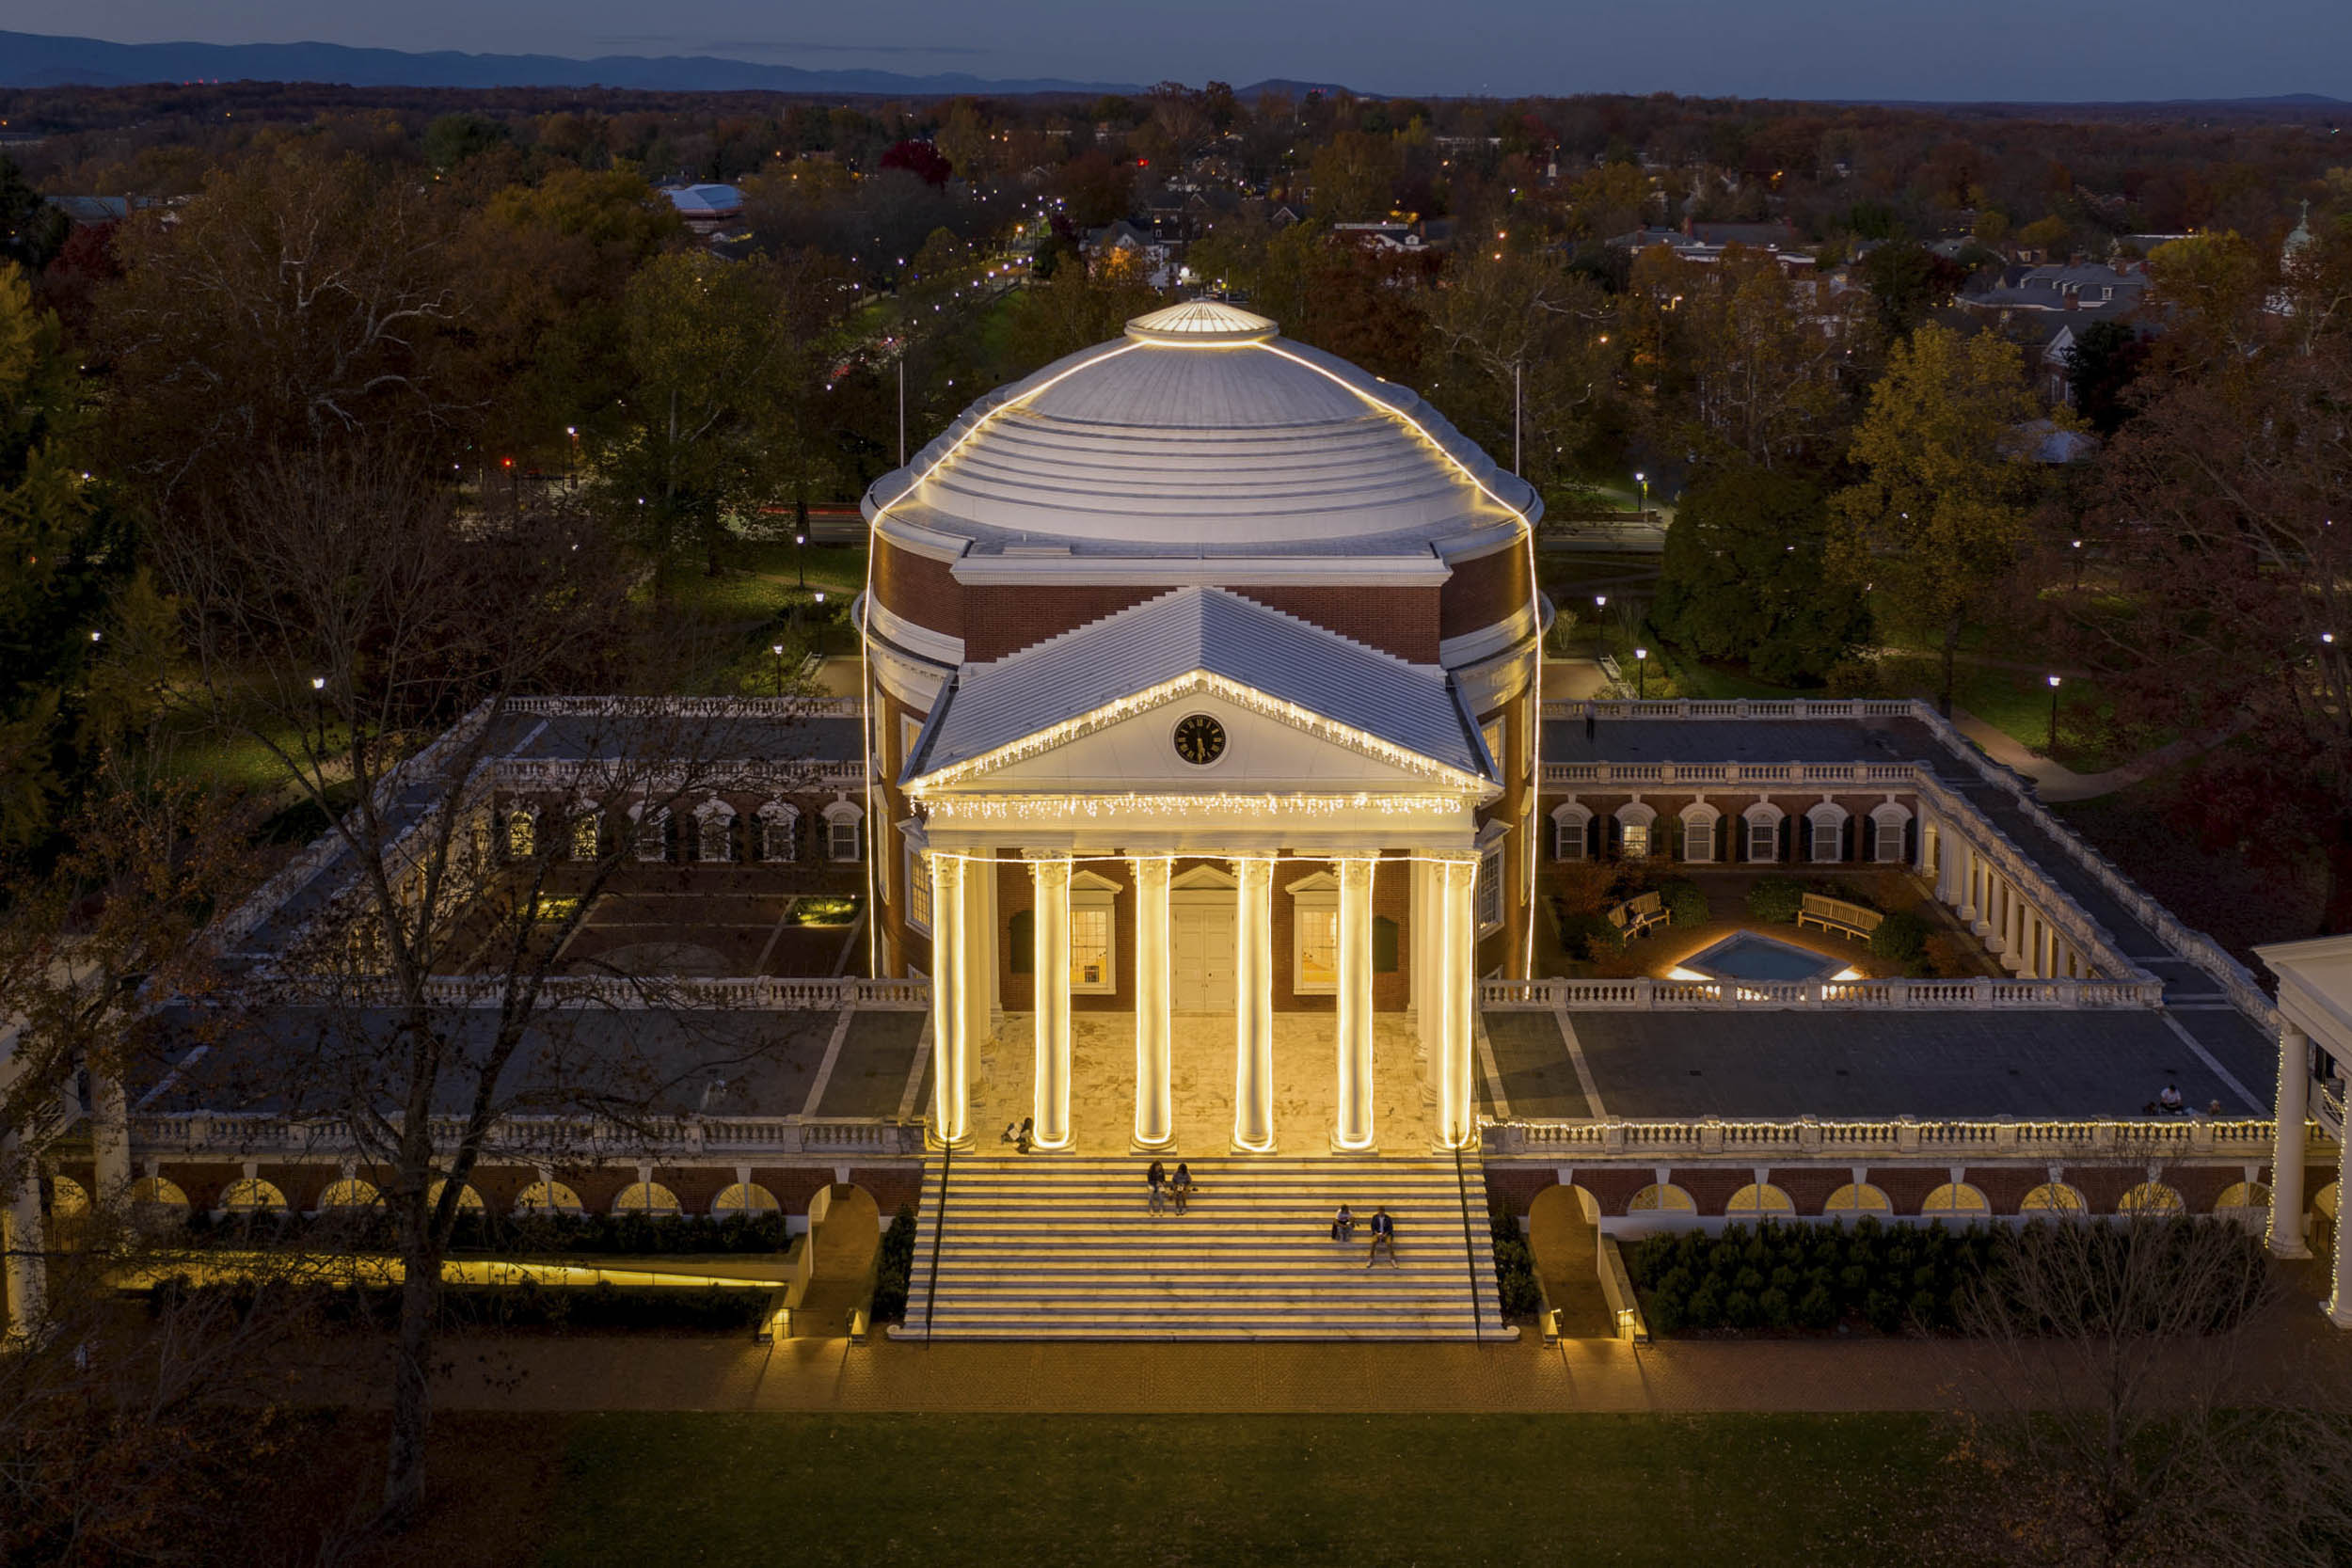 Arial view of the Rotunda Outlined in white lights